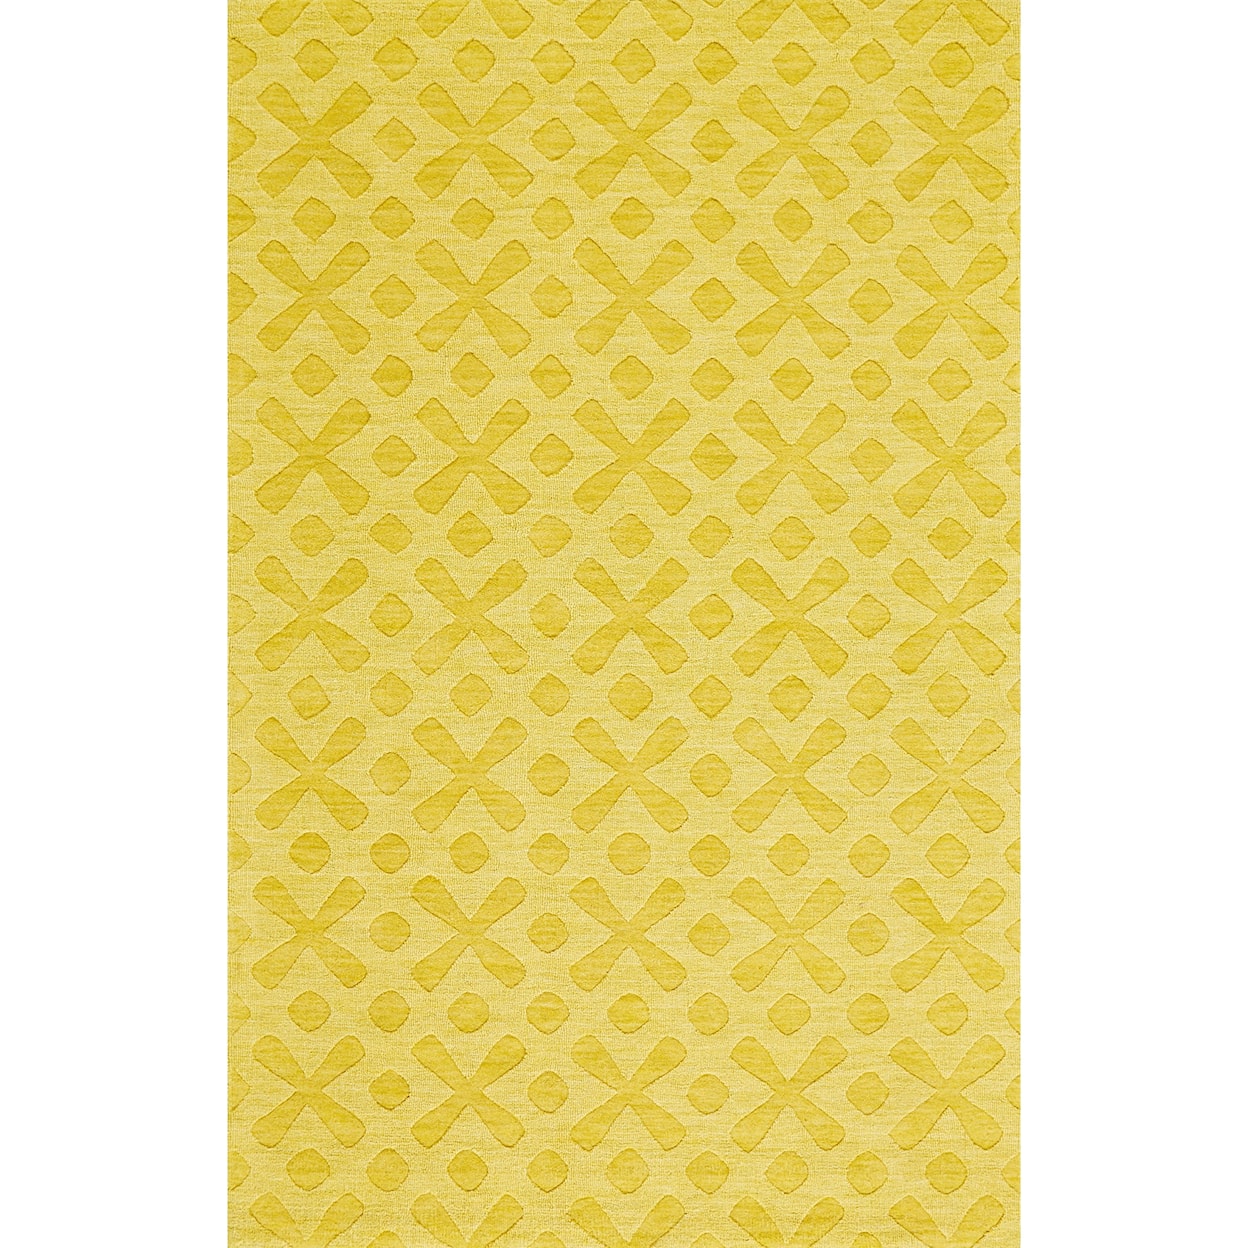 Feizy Rugs Soma Yellow 5' x 8' Area Rug